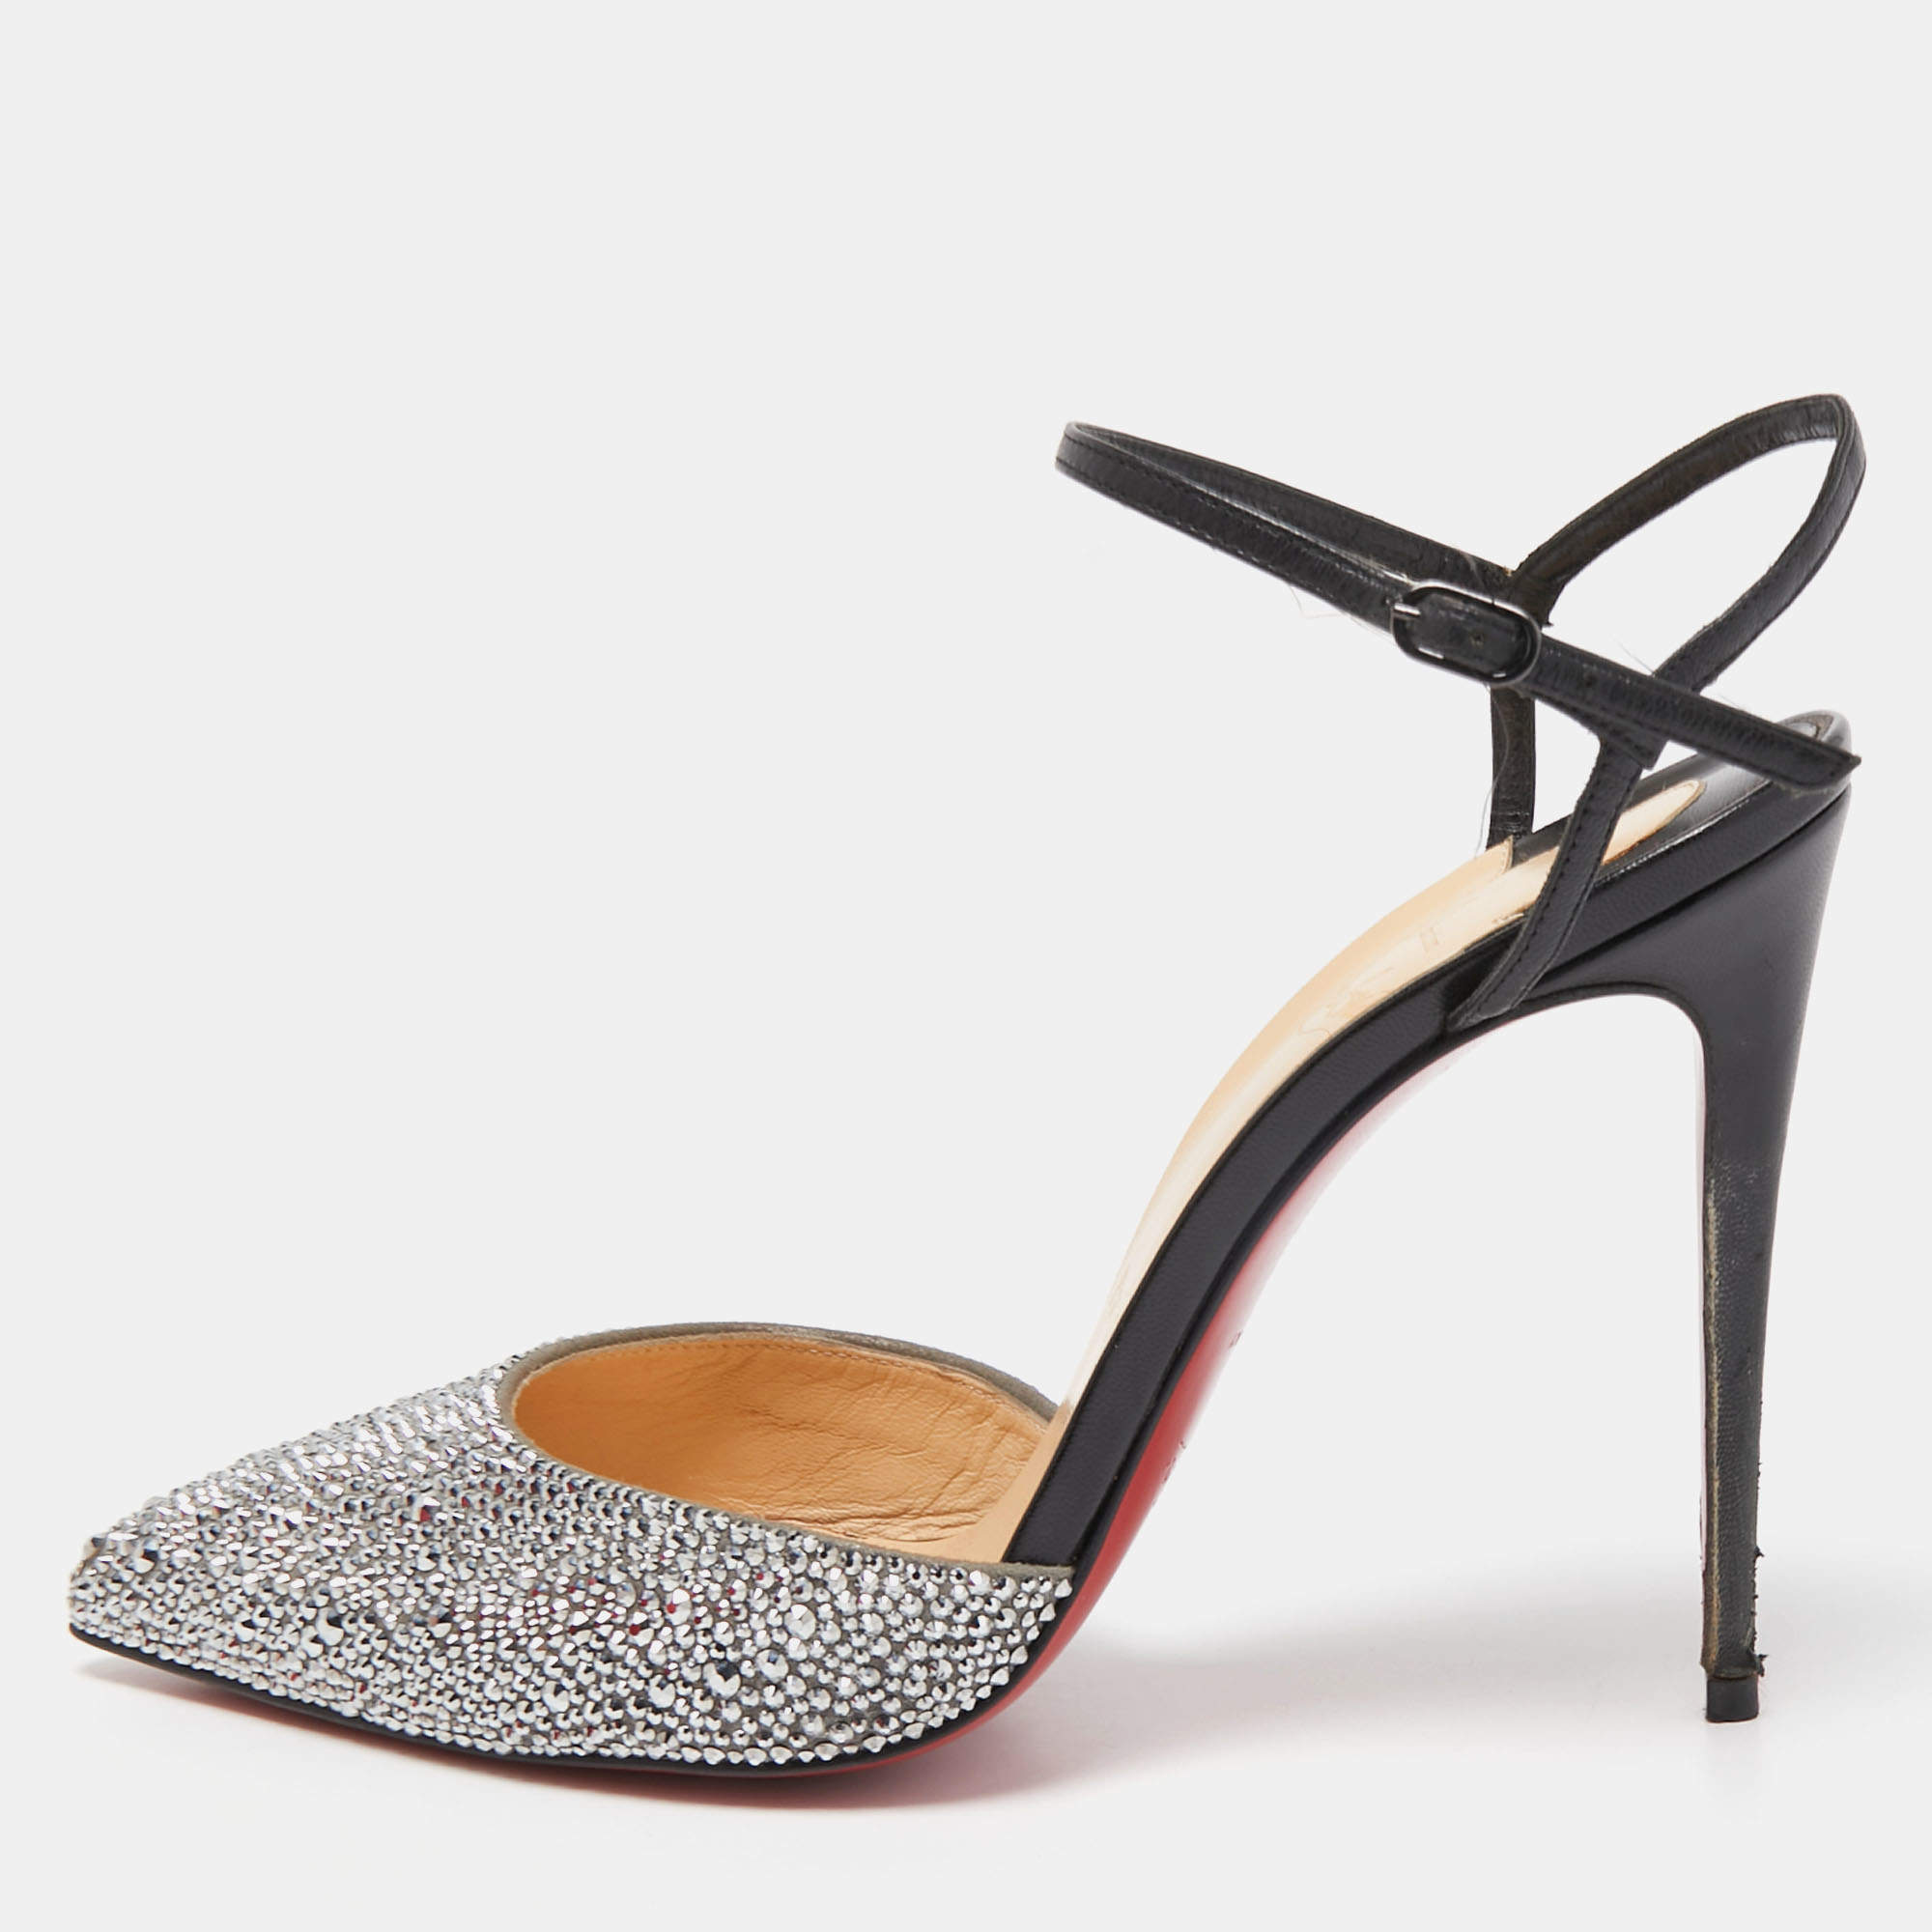 Christian Louboutin, Shoes, Black Peep Toe Tie Strings Christian Louboutin  In Original Red Bag And Box